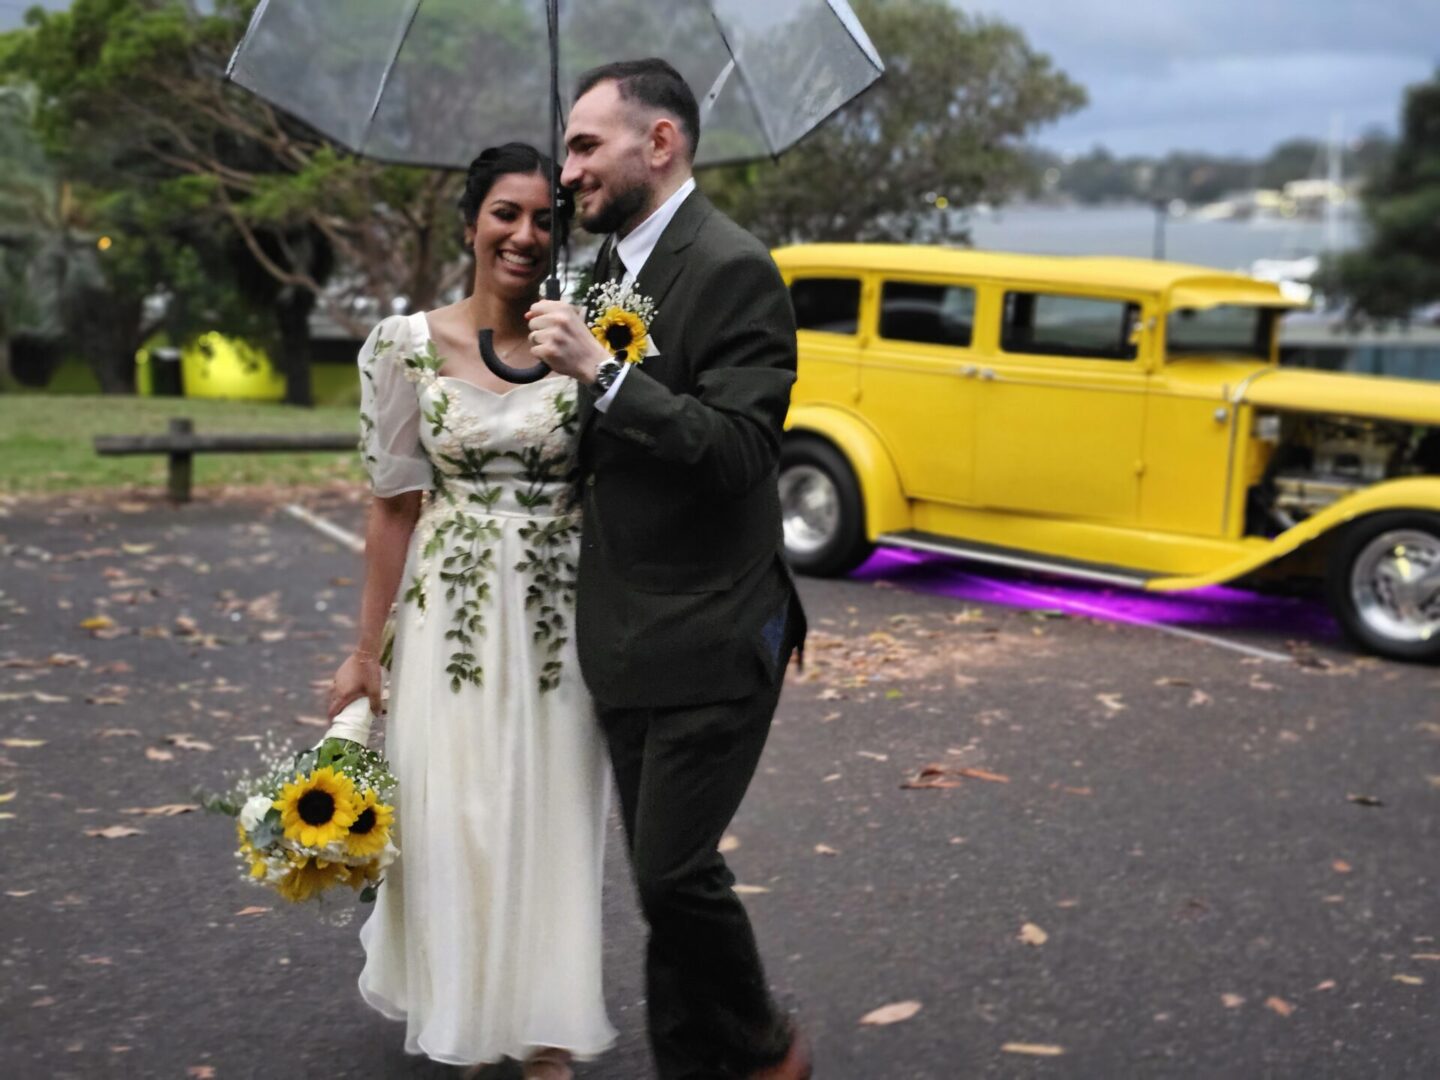 A joyful couple celebrating their wedding day, posing elegantly beside our yellow hot rod, the ideal wedding car for hire